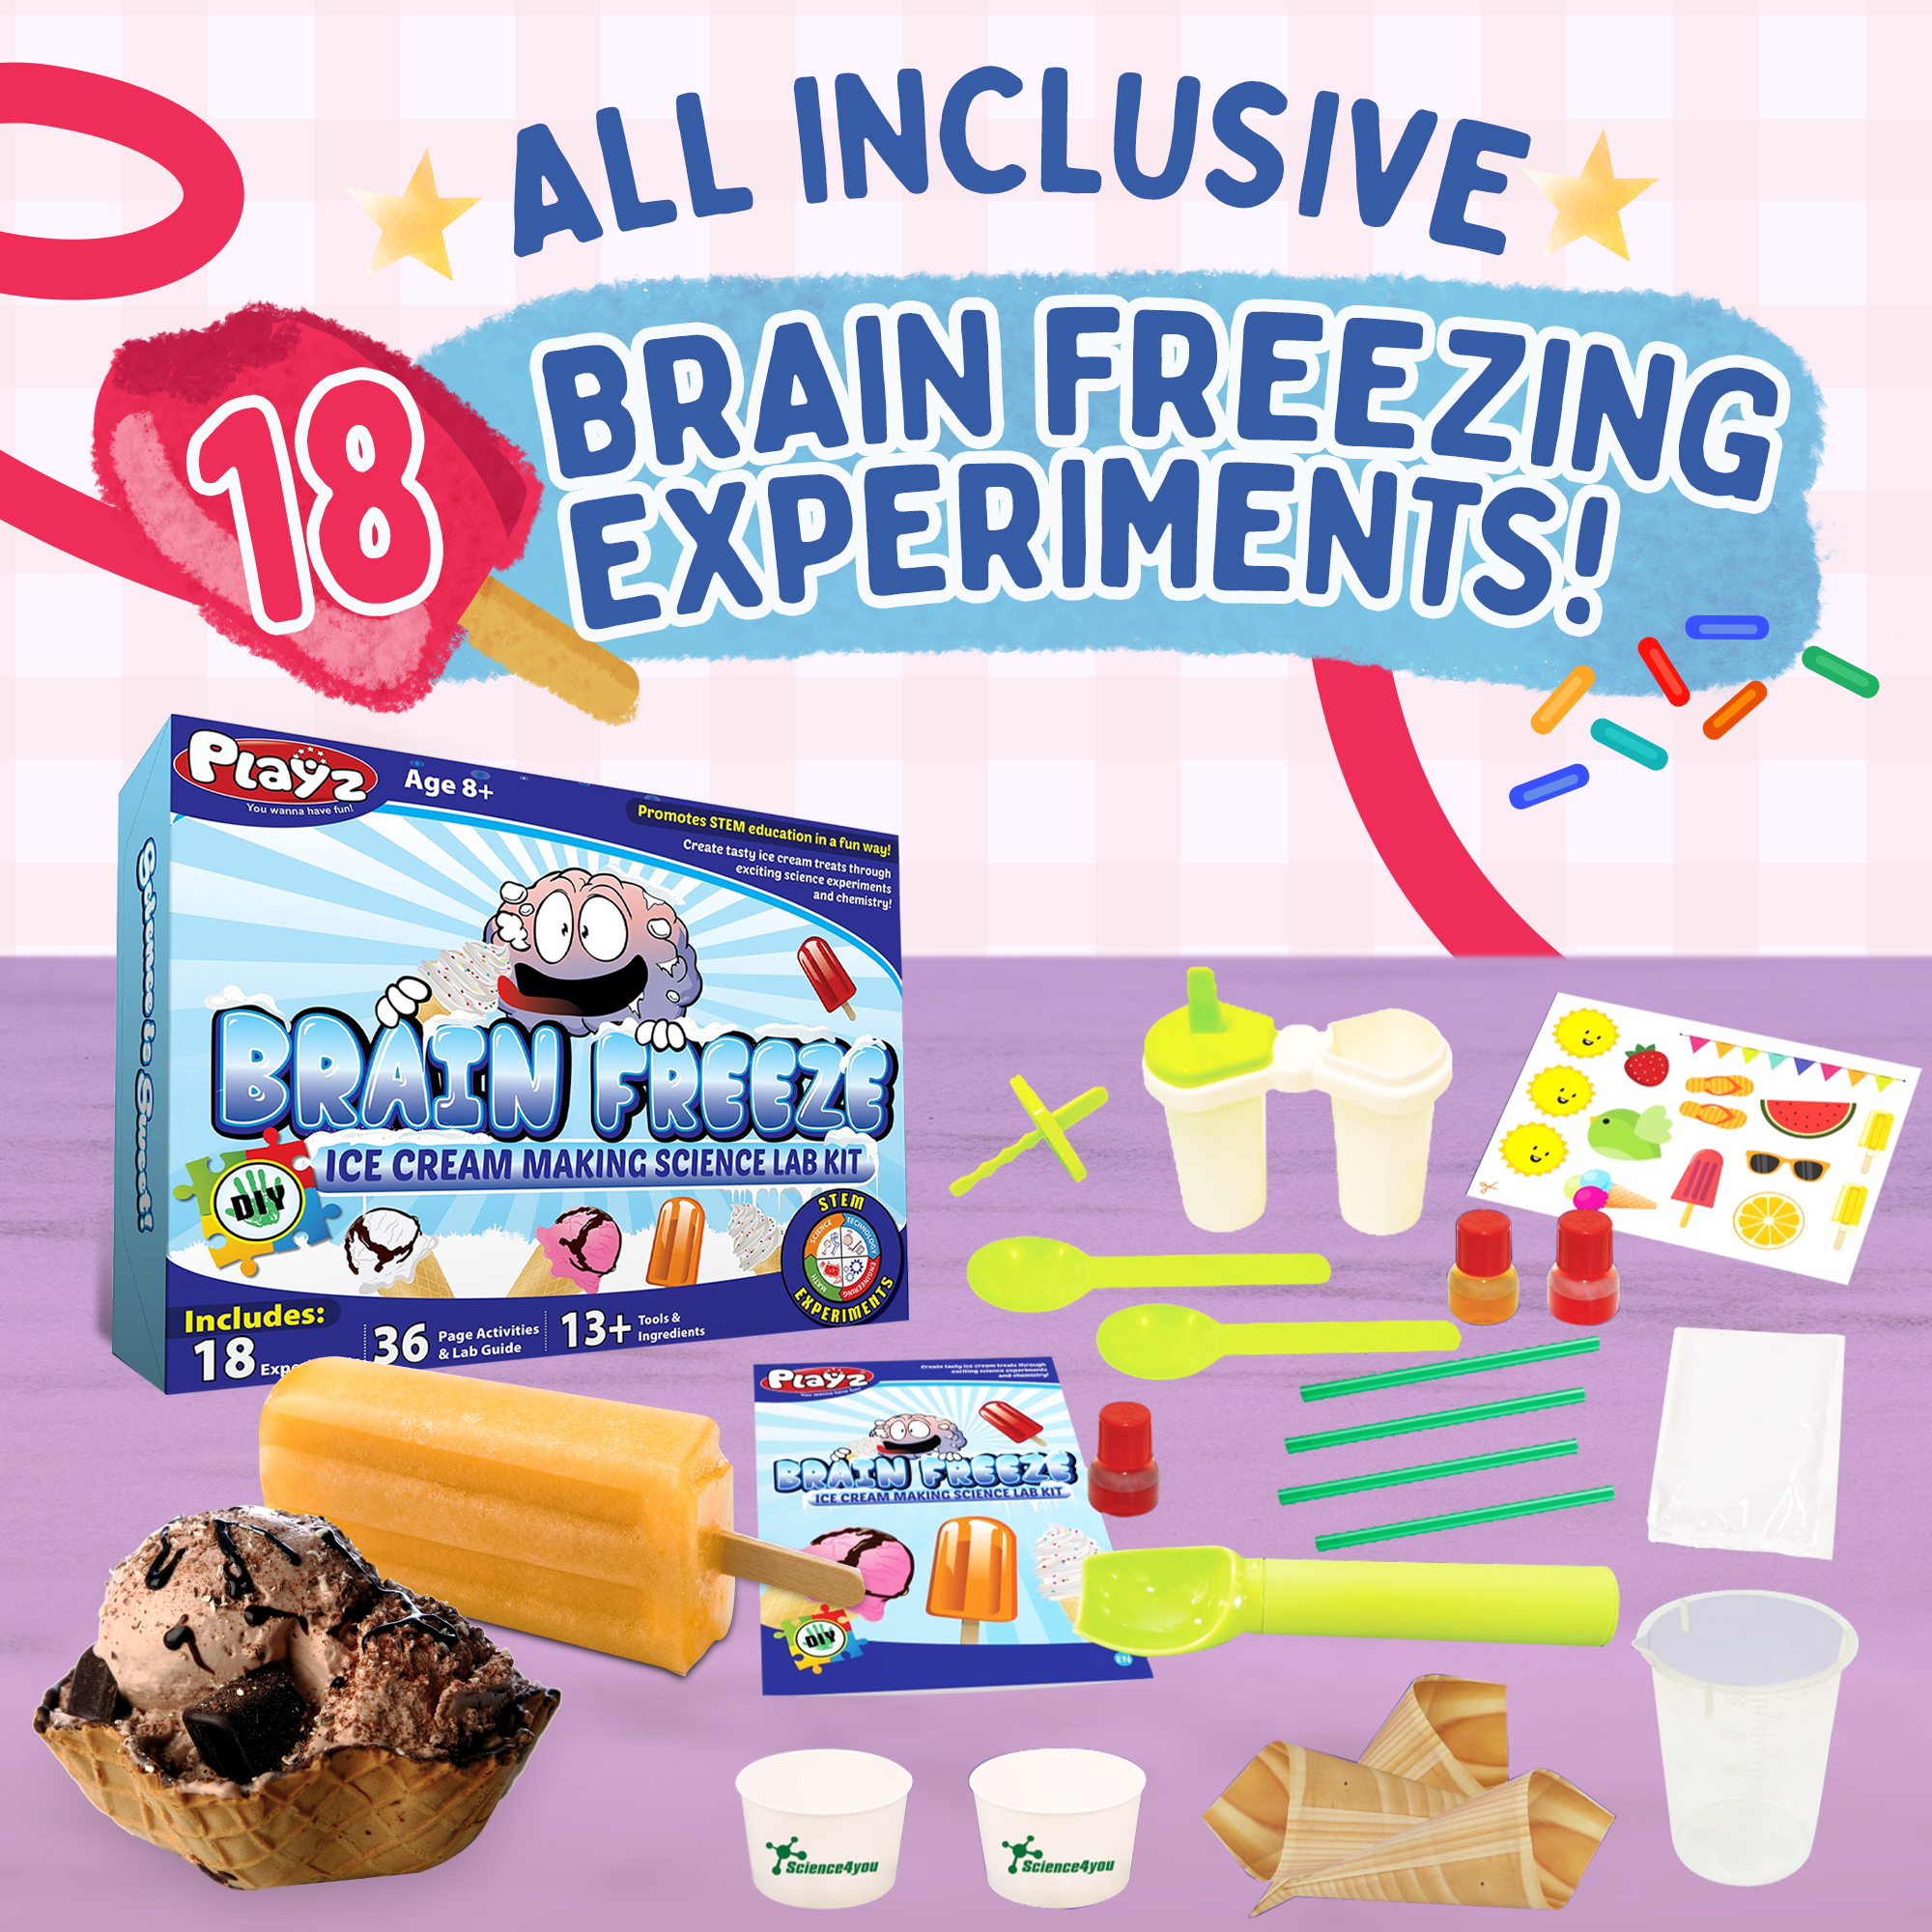 Brain Freeze Ice Cream Science Kit – Playz - Fun for all ages!